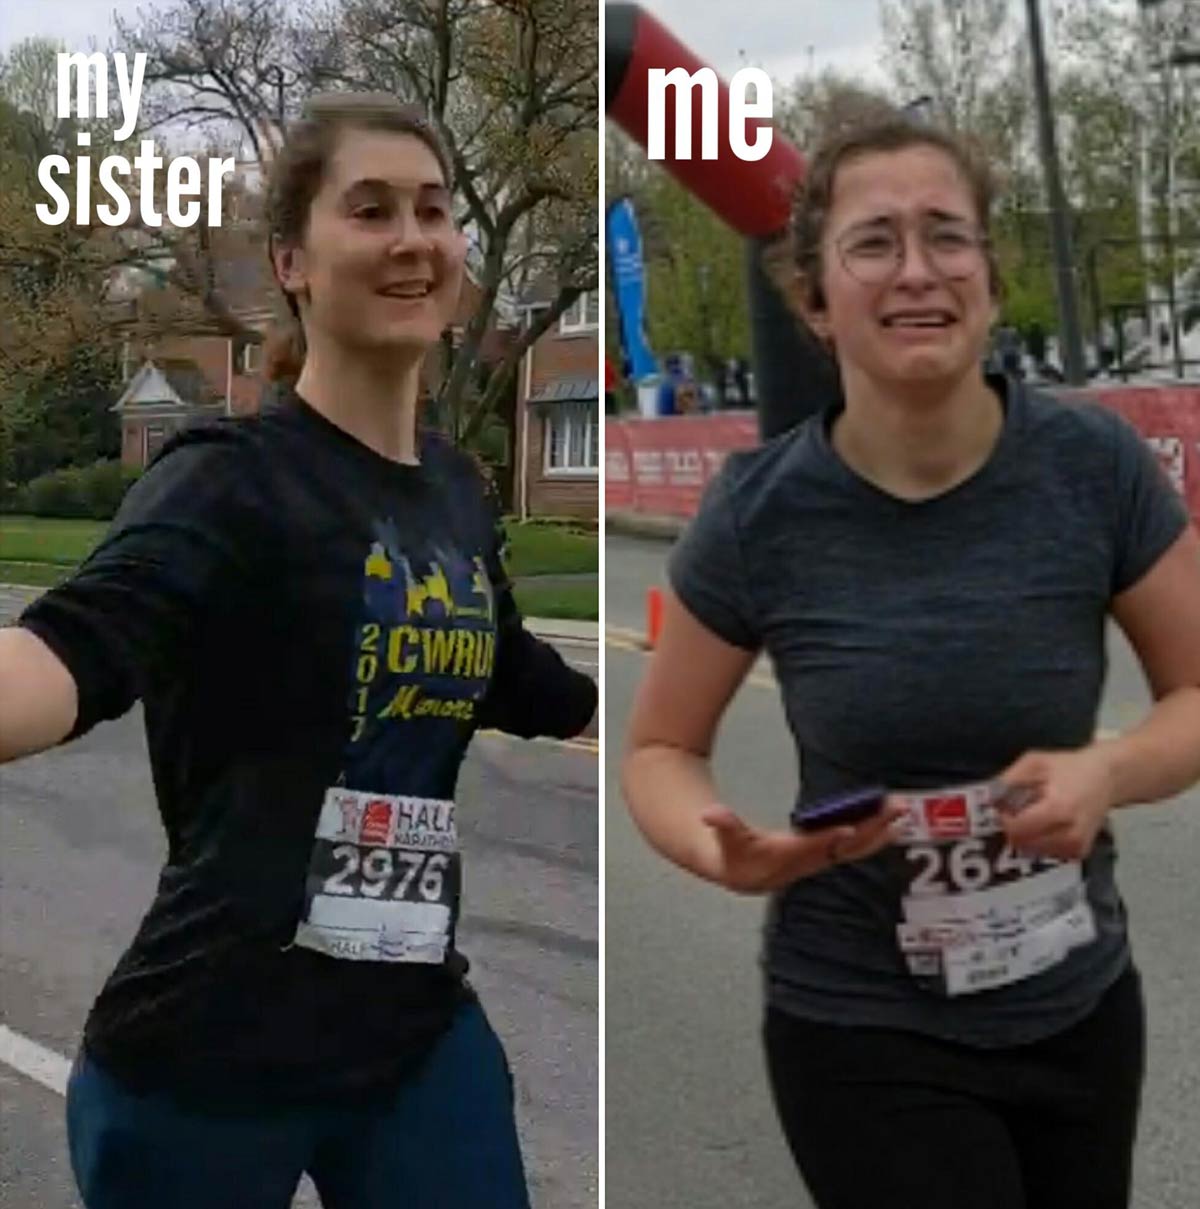 My sister: "You can do the half-marathon with me! Trust me, it's not that bad."